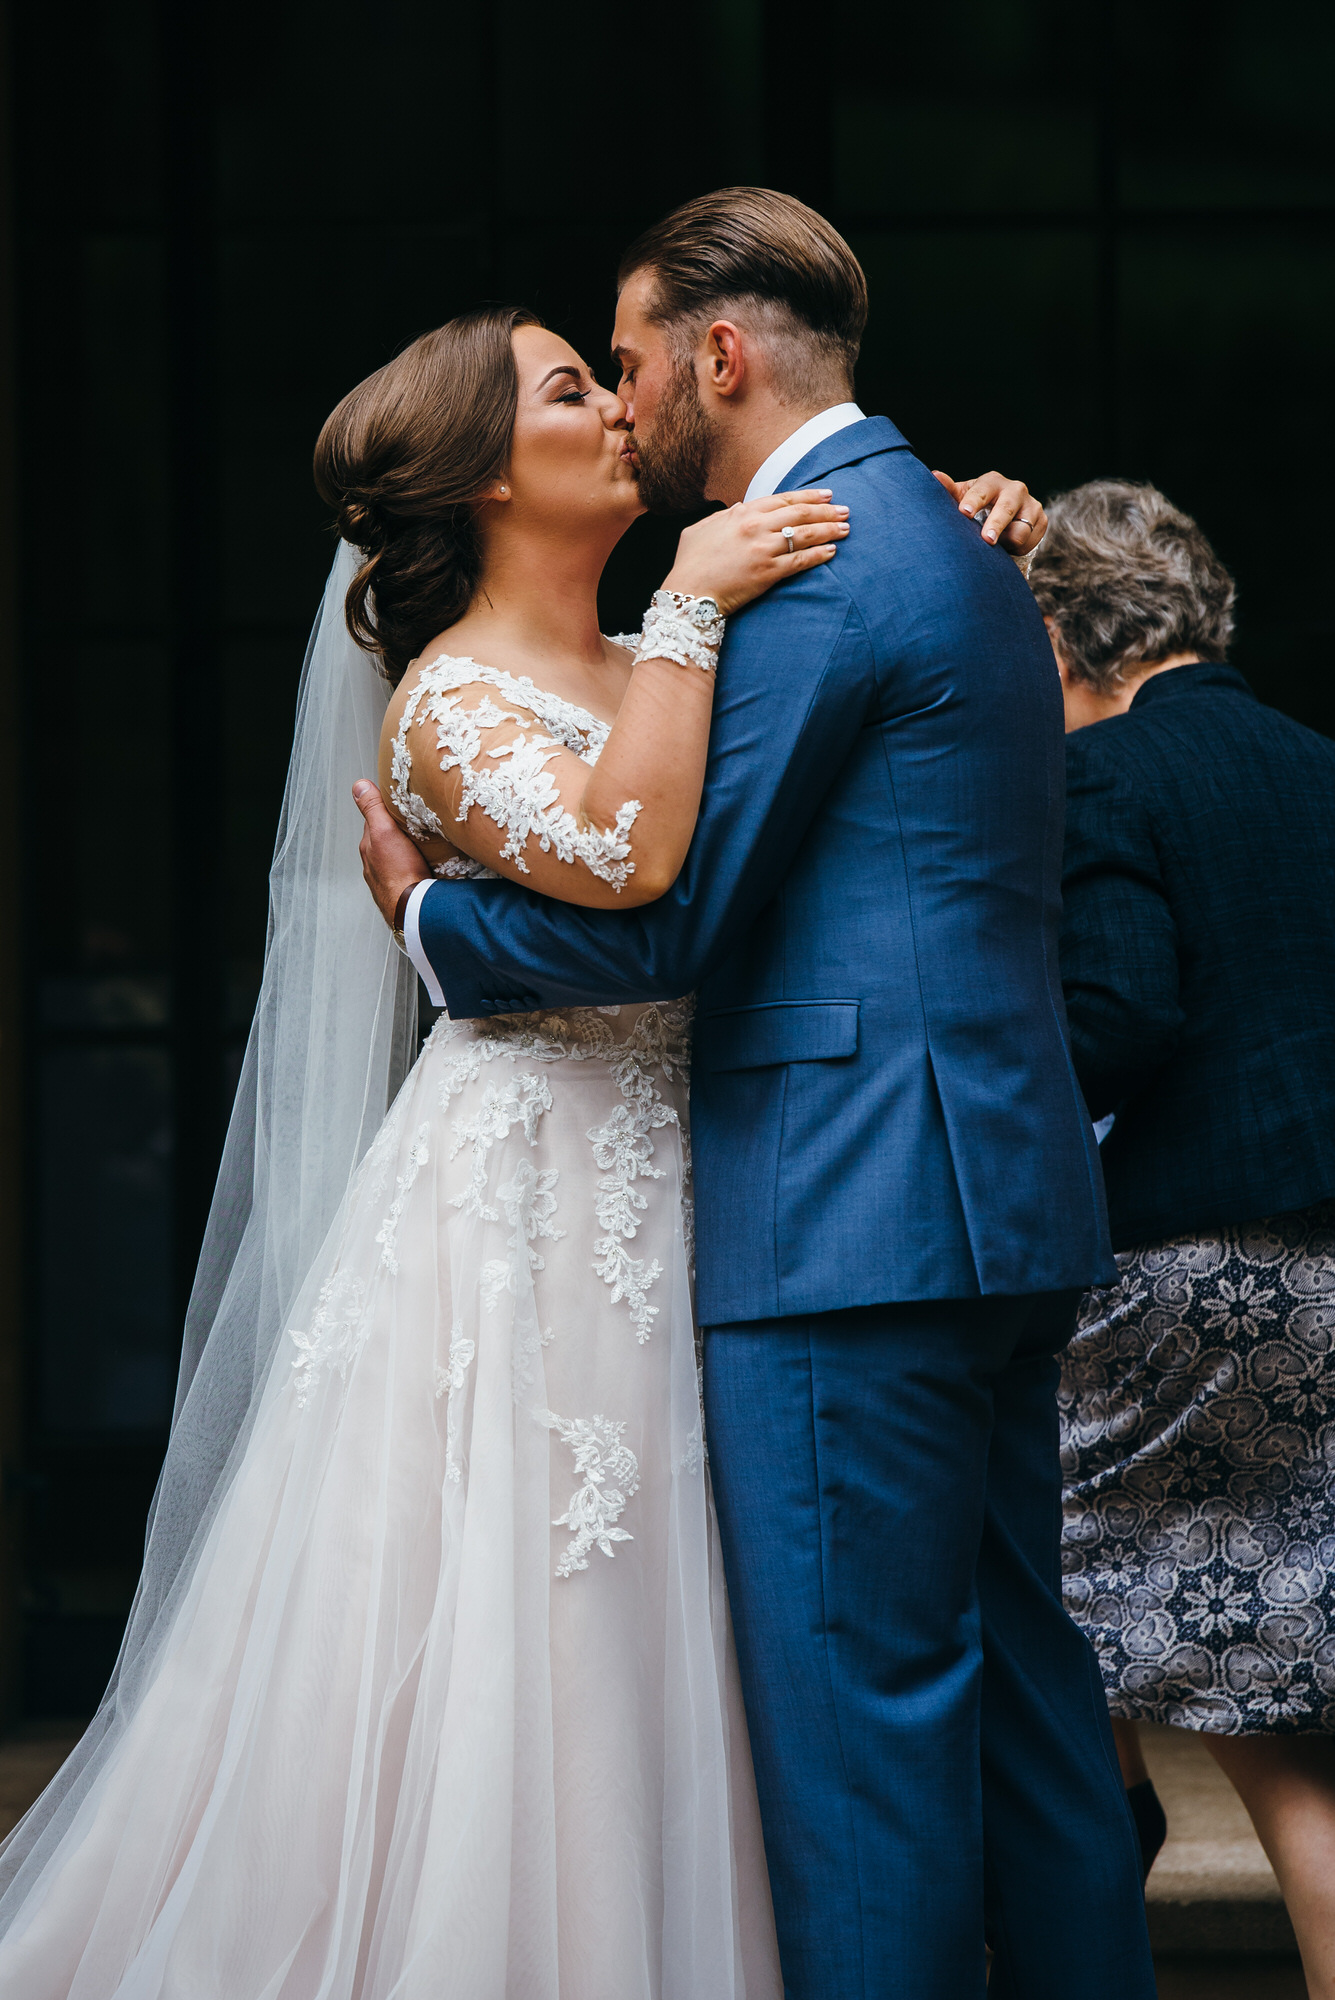 First kiss during ceremony at Coombe Lodge 